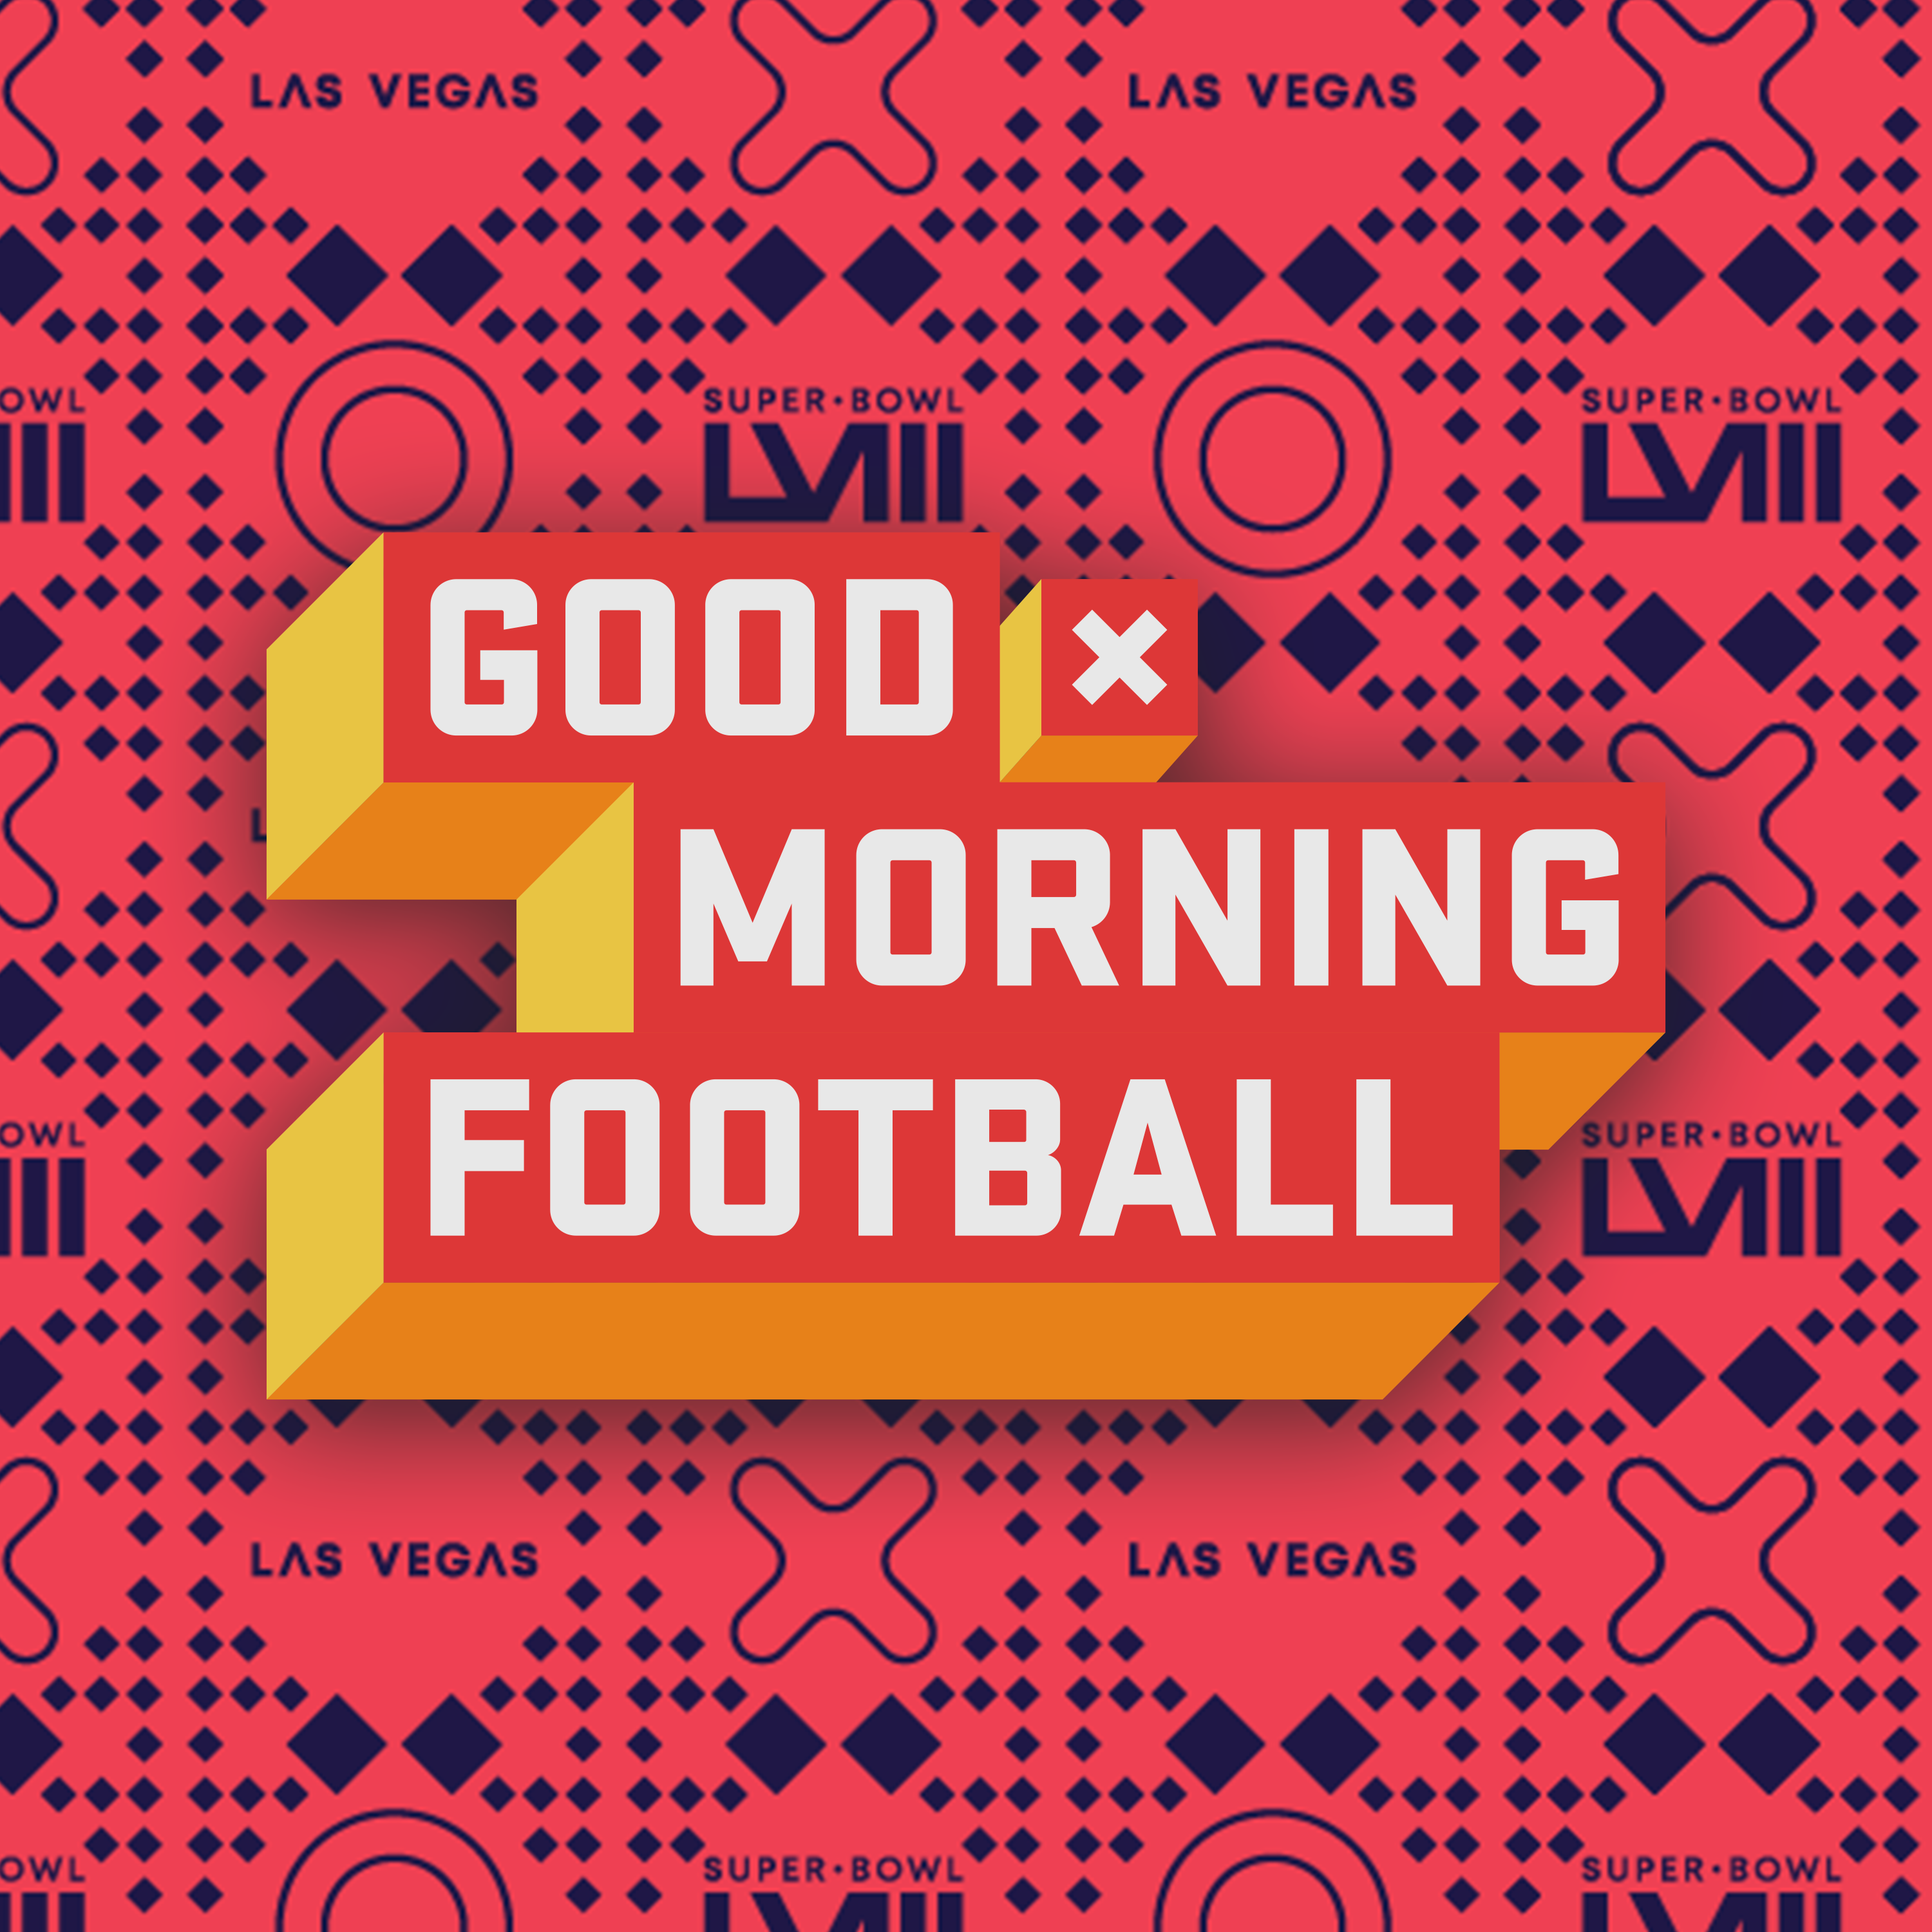 GMFB Wednesday Pt1: Sherree Burruss, Omar Ruiz Last Vegas, Purdy Critics Discussion, Patrick Mahomes Feature and Josh Metellus reflects on his time at Michigan